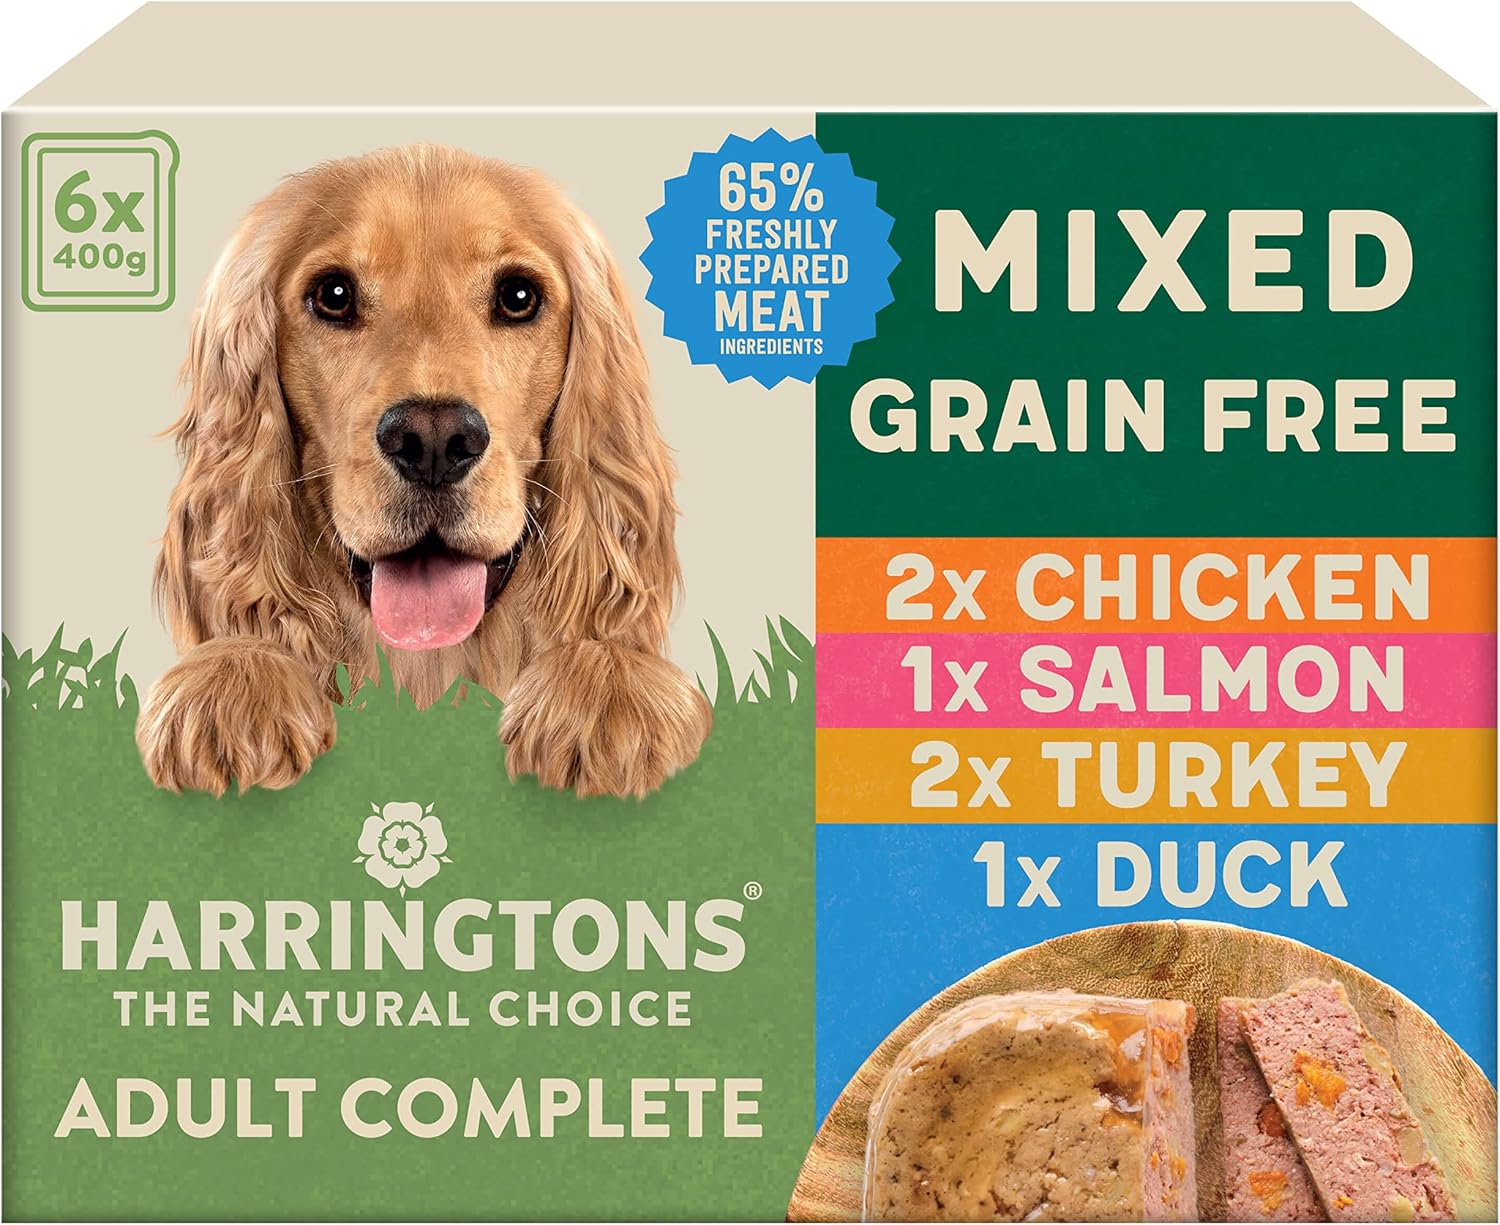 Harringtons Complete Wet Tray Grain Free Hypoallergenic Adult Dog Food Mixed Pack 6x400g - Chicken, Salmon, Turkey & Duck - Made with All Natural Ingredients?HARRWVAR-C400